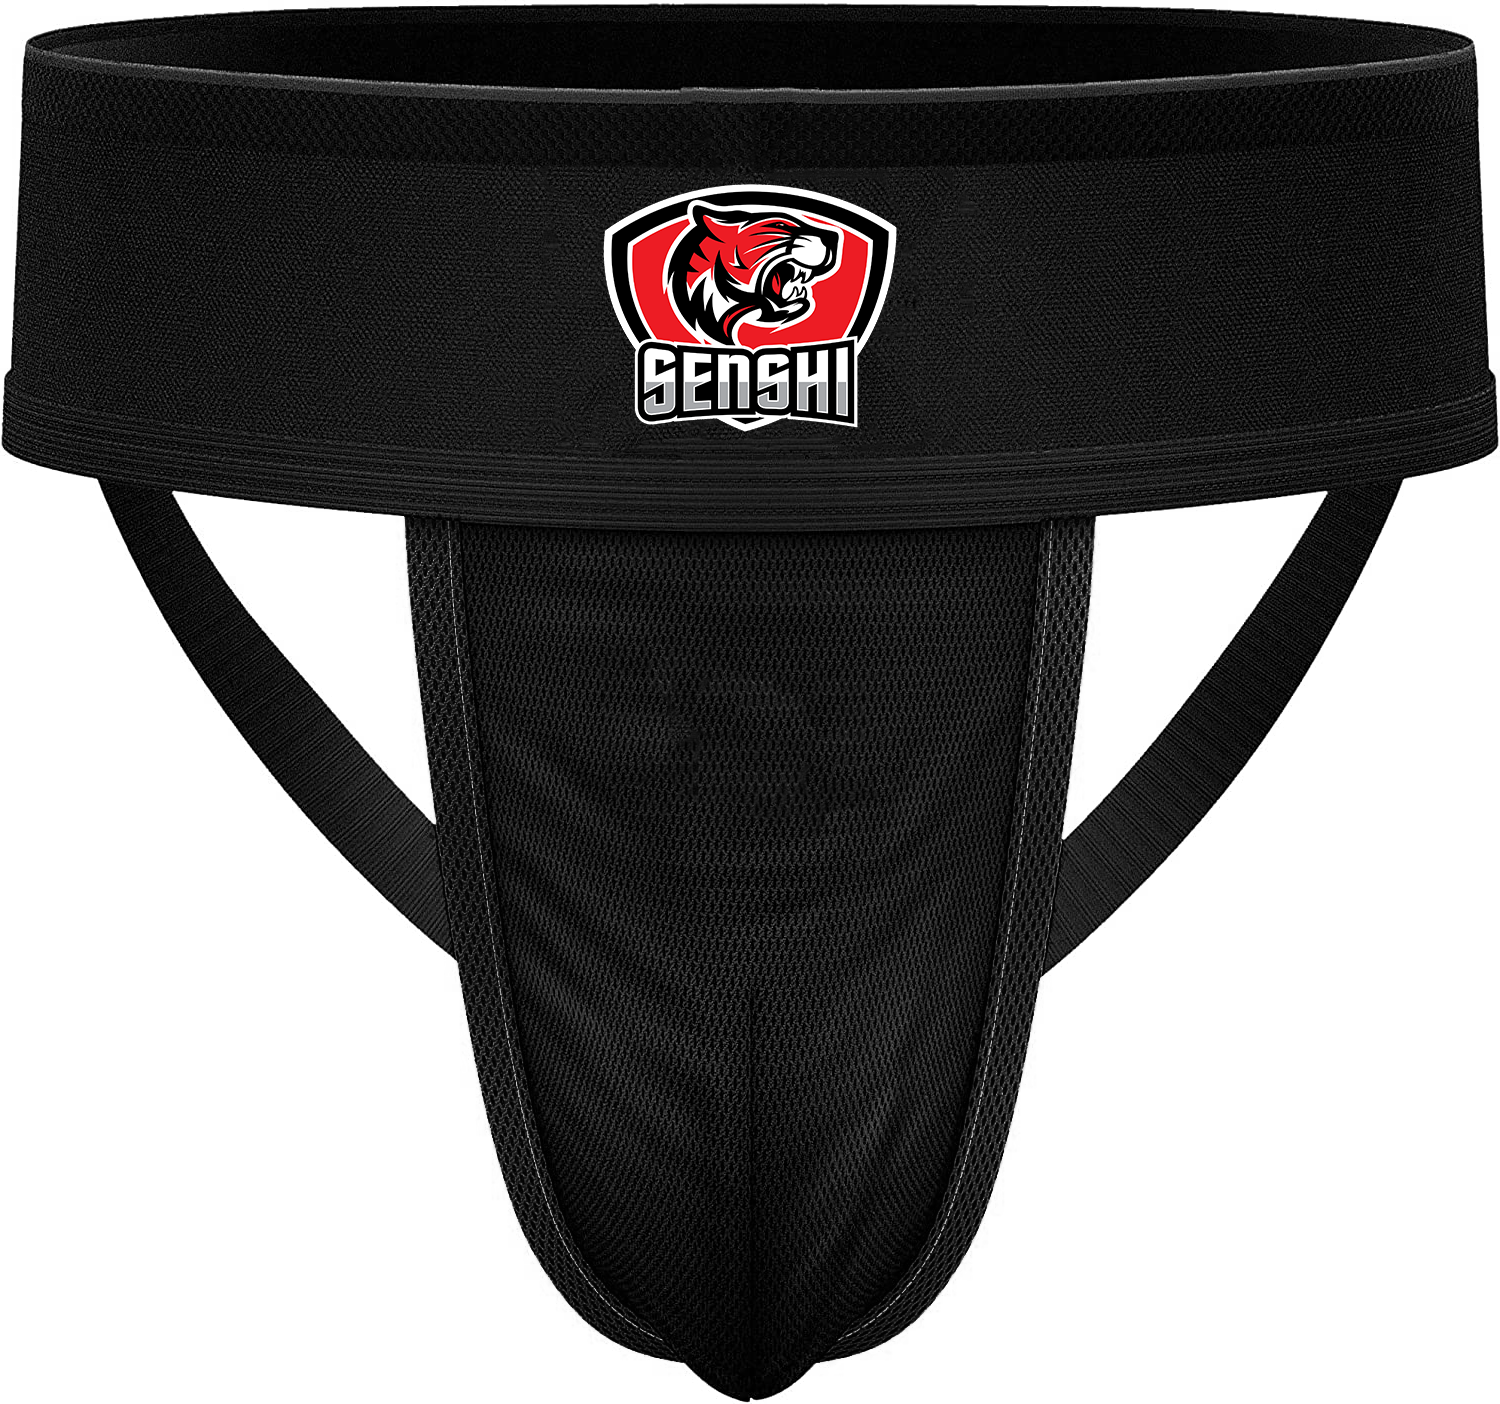 Black Groin Guard With Removable Cup